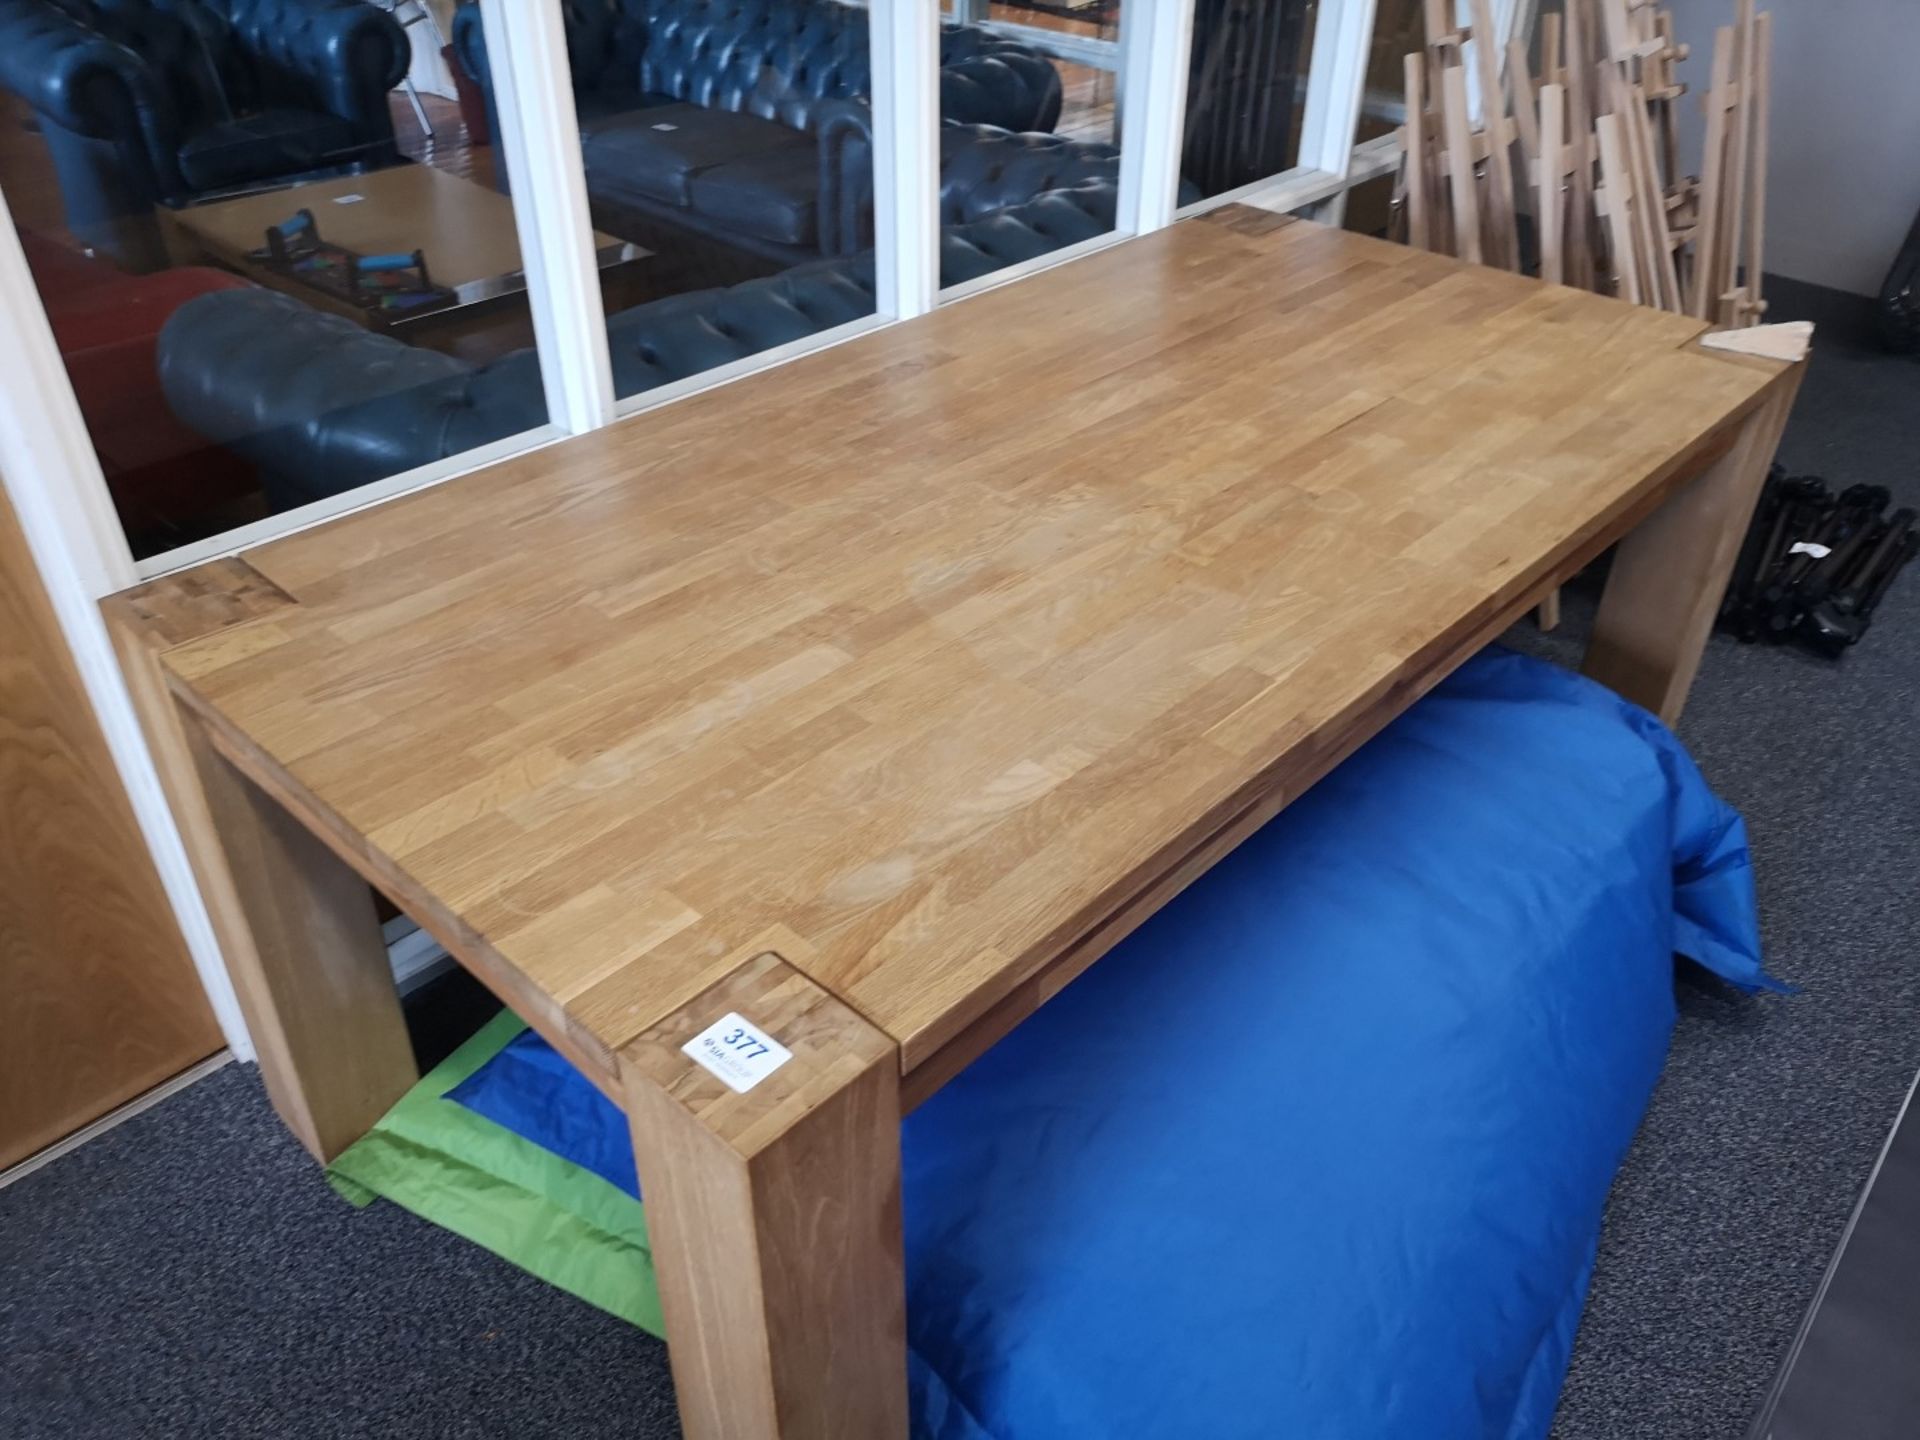 Hardwood Oak Table (approx 2M x 1M) plus Two Large Bean Bags